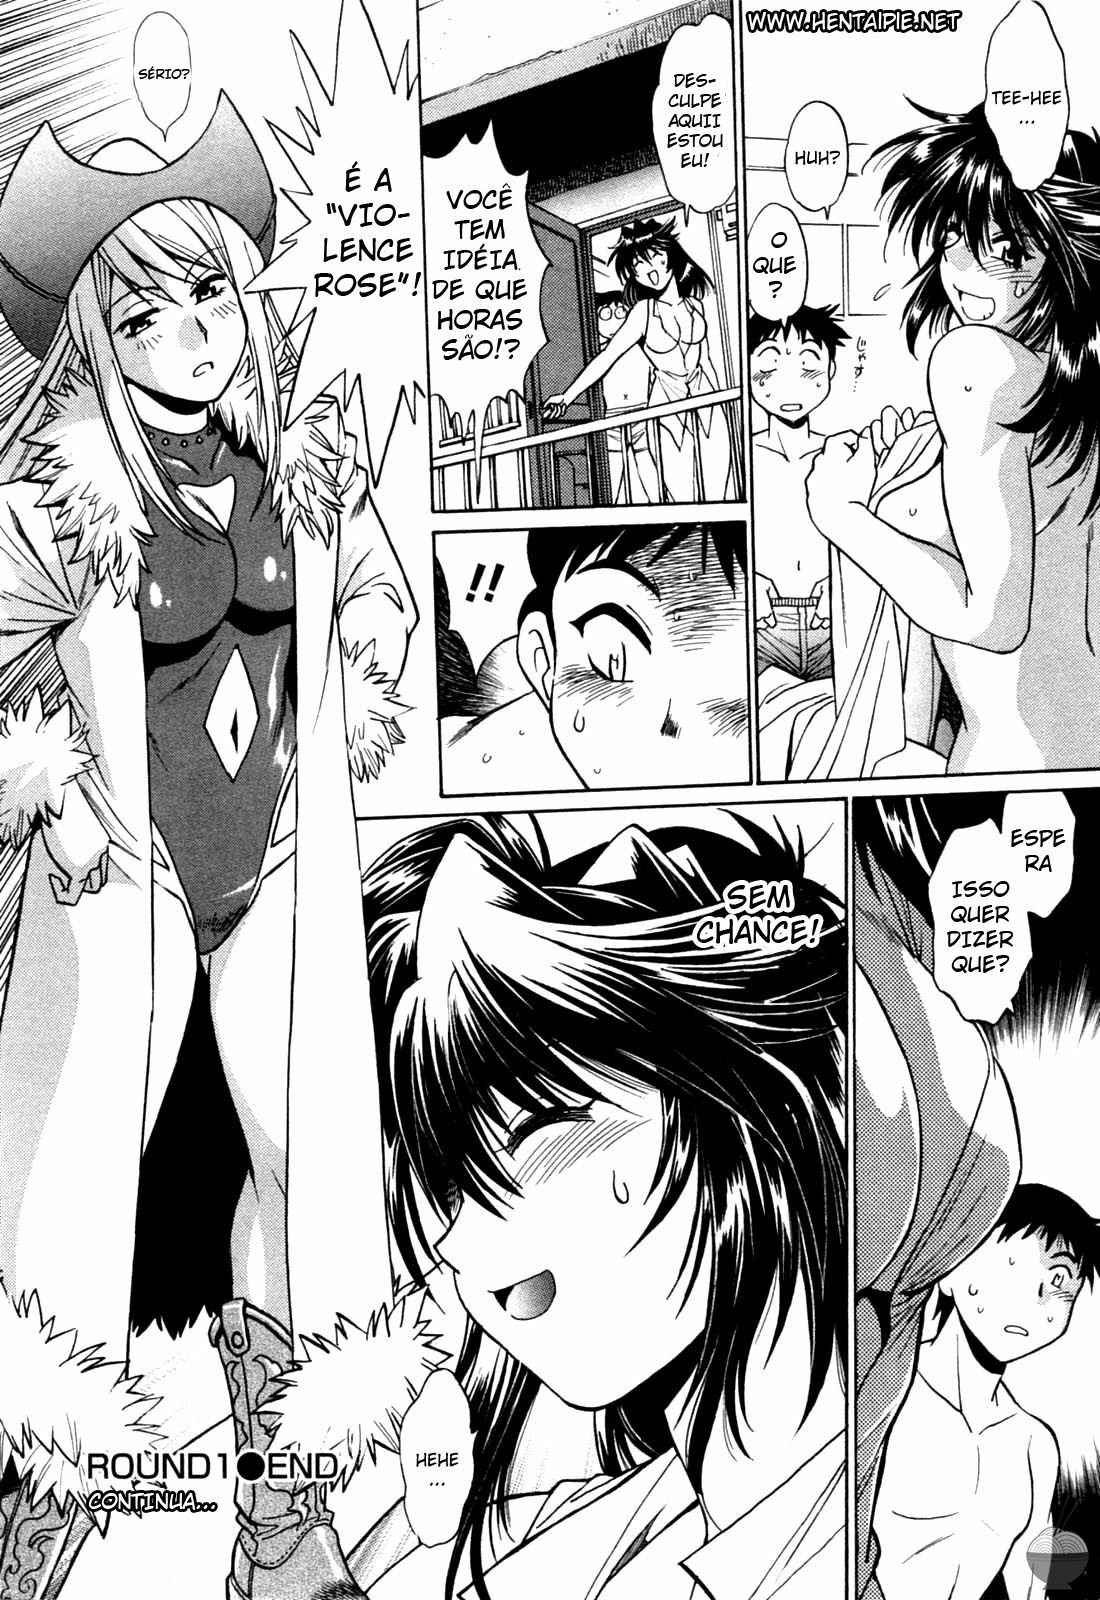 [Manabe Jouji] Ring x Mama 1 [Portuguese-BR] [HentaiPie] page 30 full